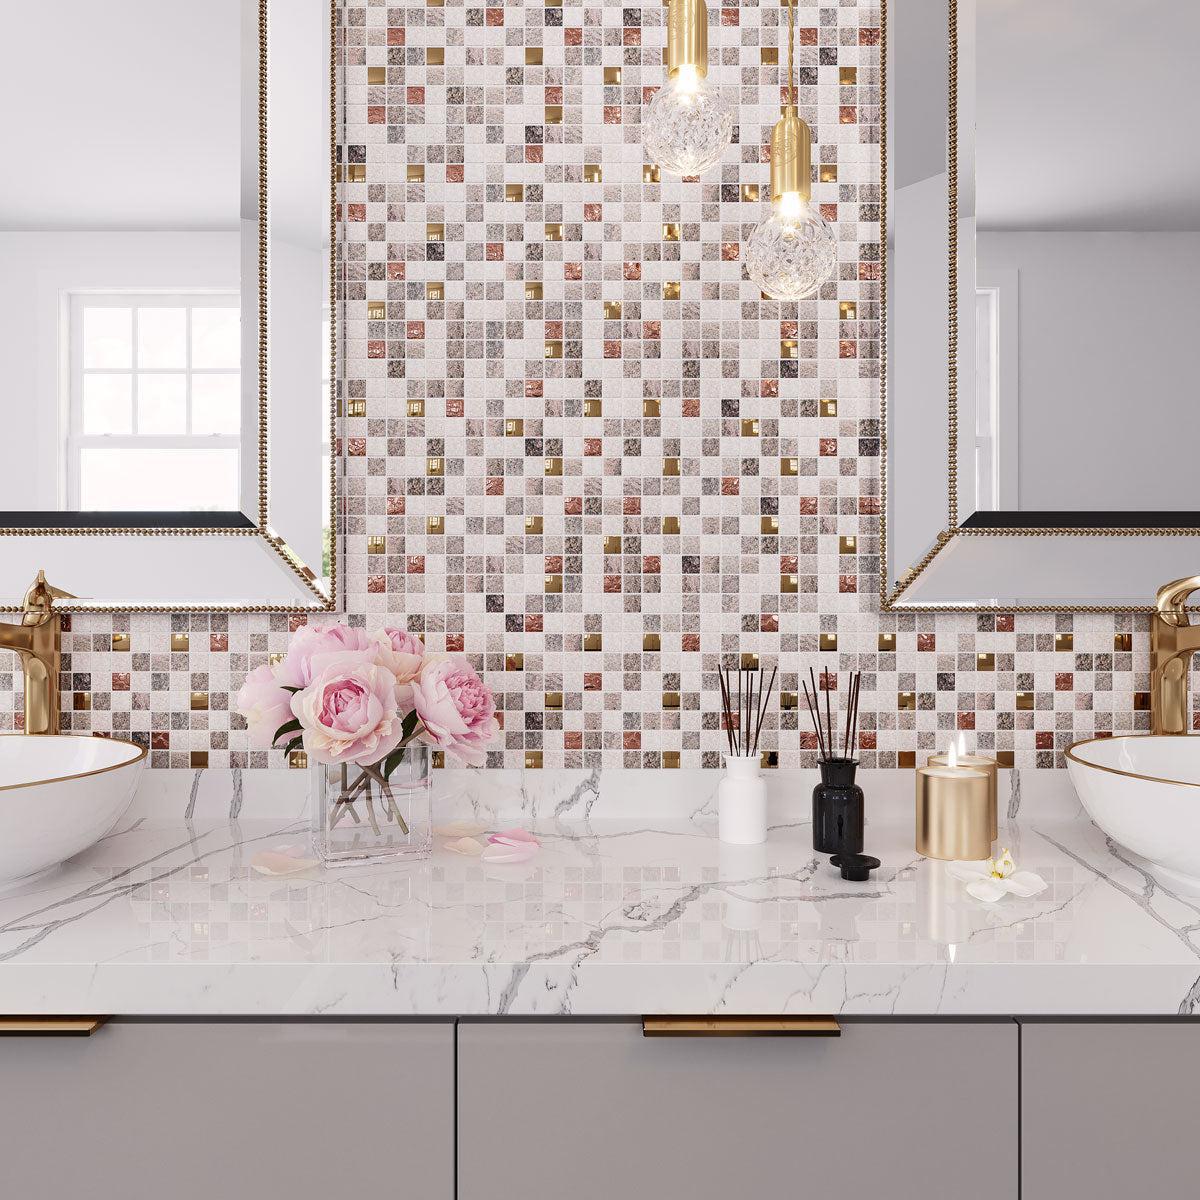 Geological Copper Mosaic Tile Bathroom backsplash with white marble and metallic fixtures